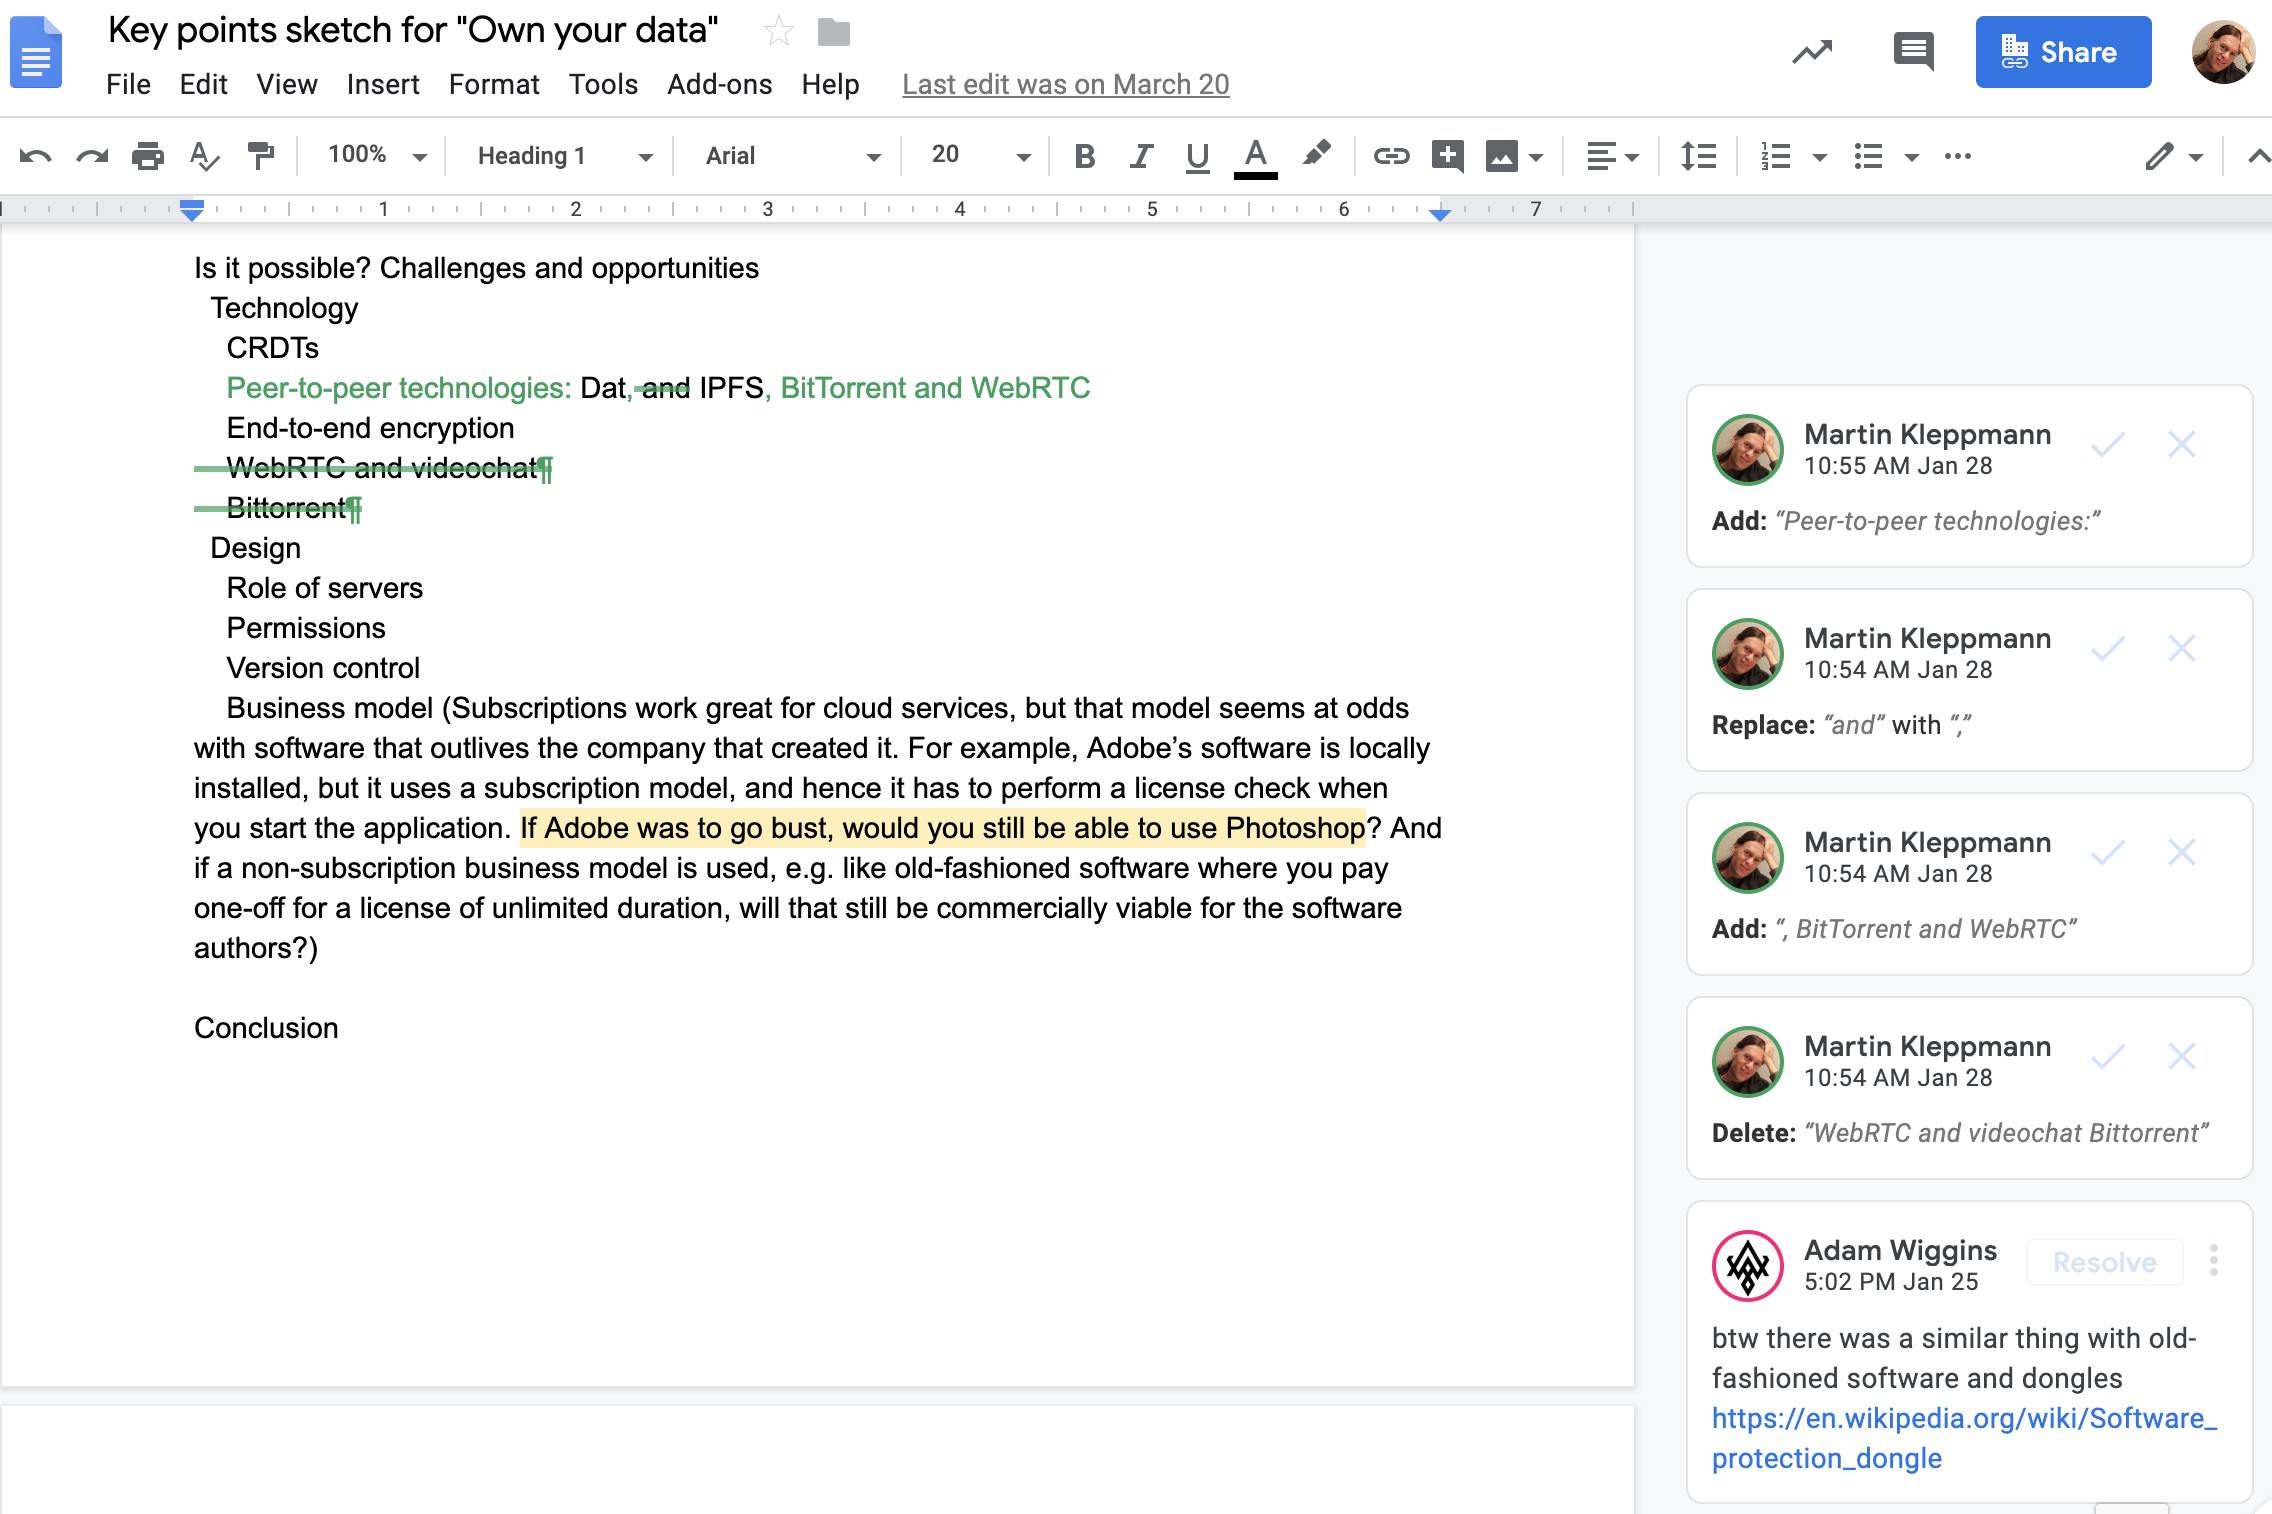 Suggesting changes in Google Docs